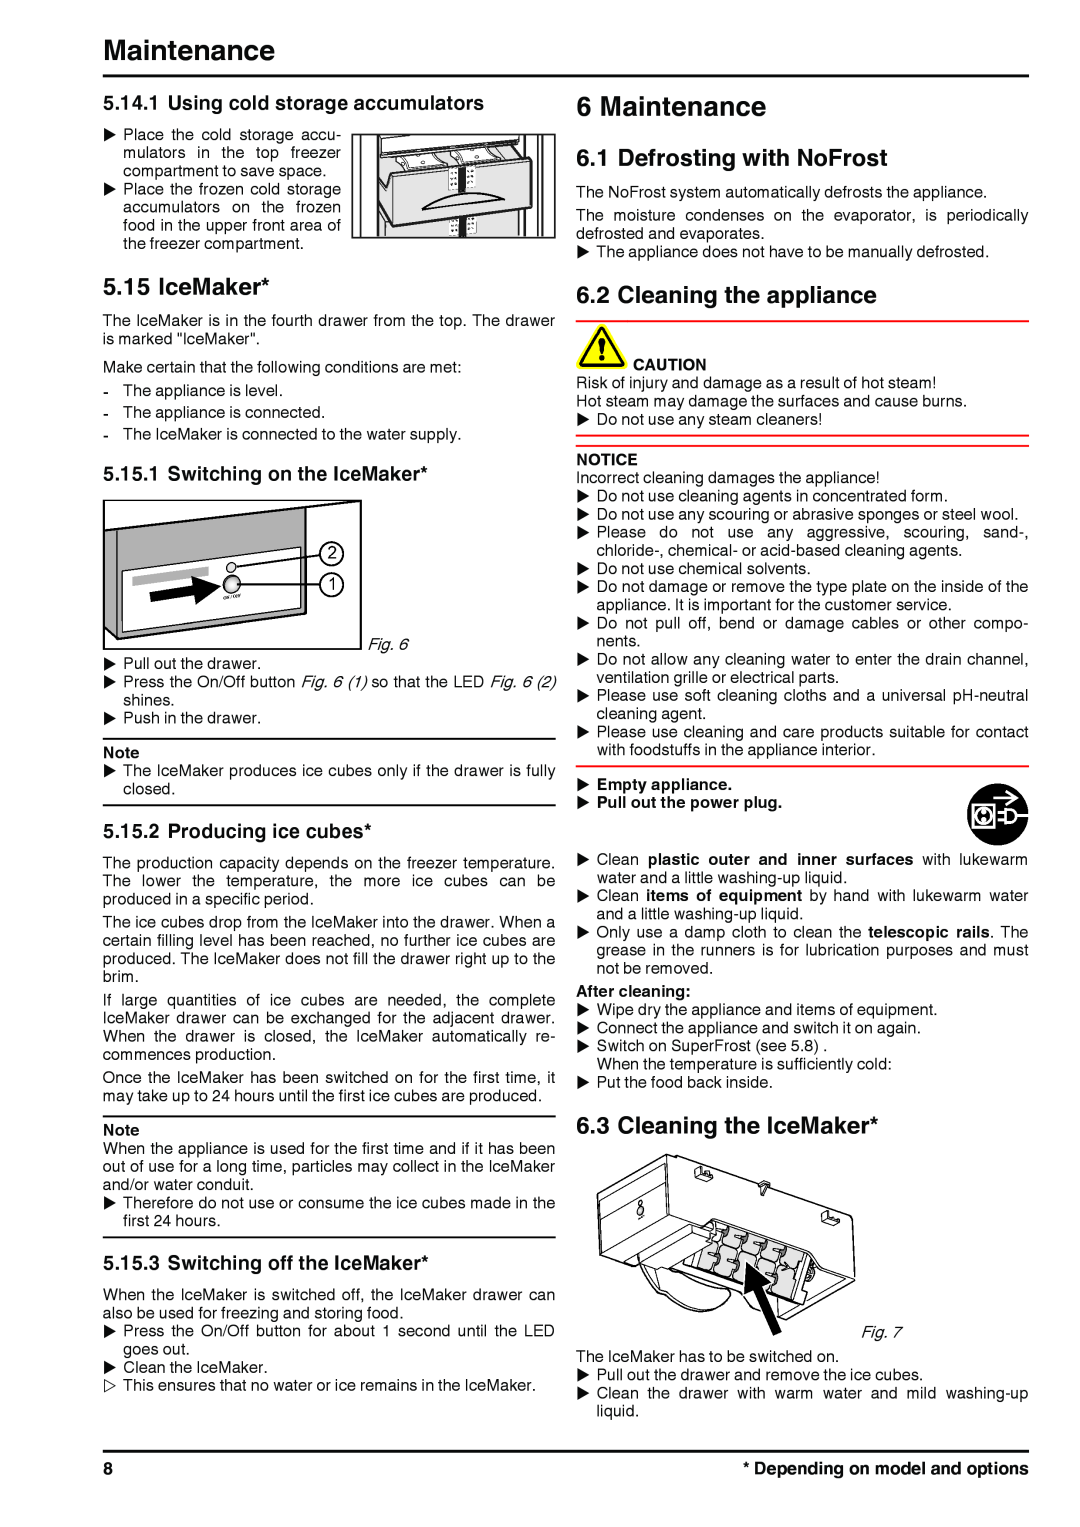 Liebherr 120713 7082694 - 01 manual Maintenance, Defrosting with NoFrost, Cleaning the appliance, Cleaning the IceMaker 